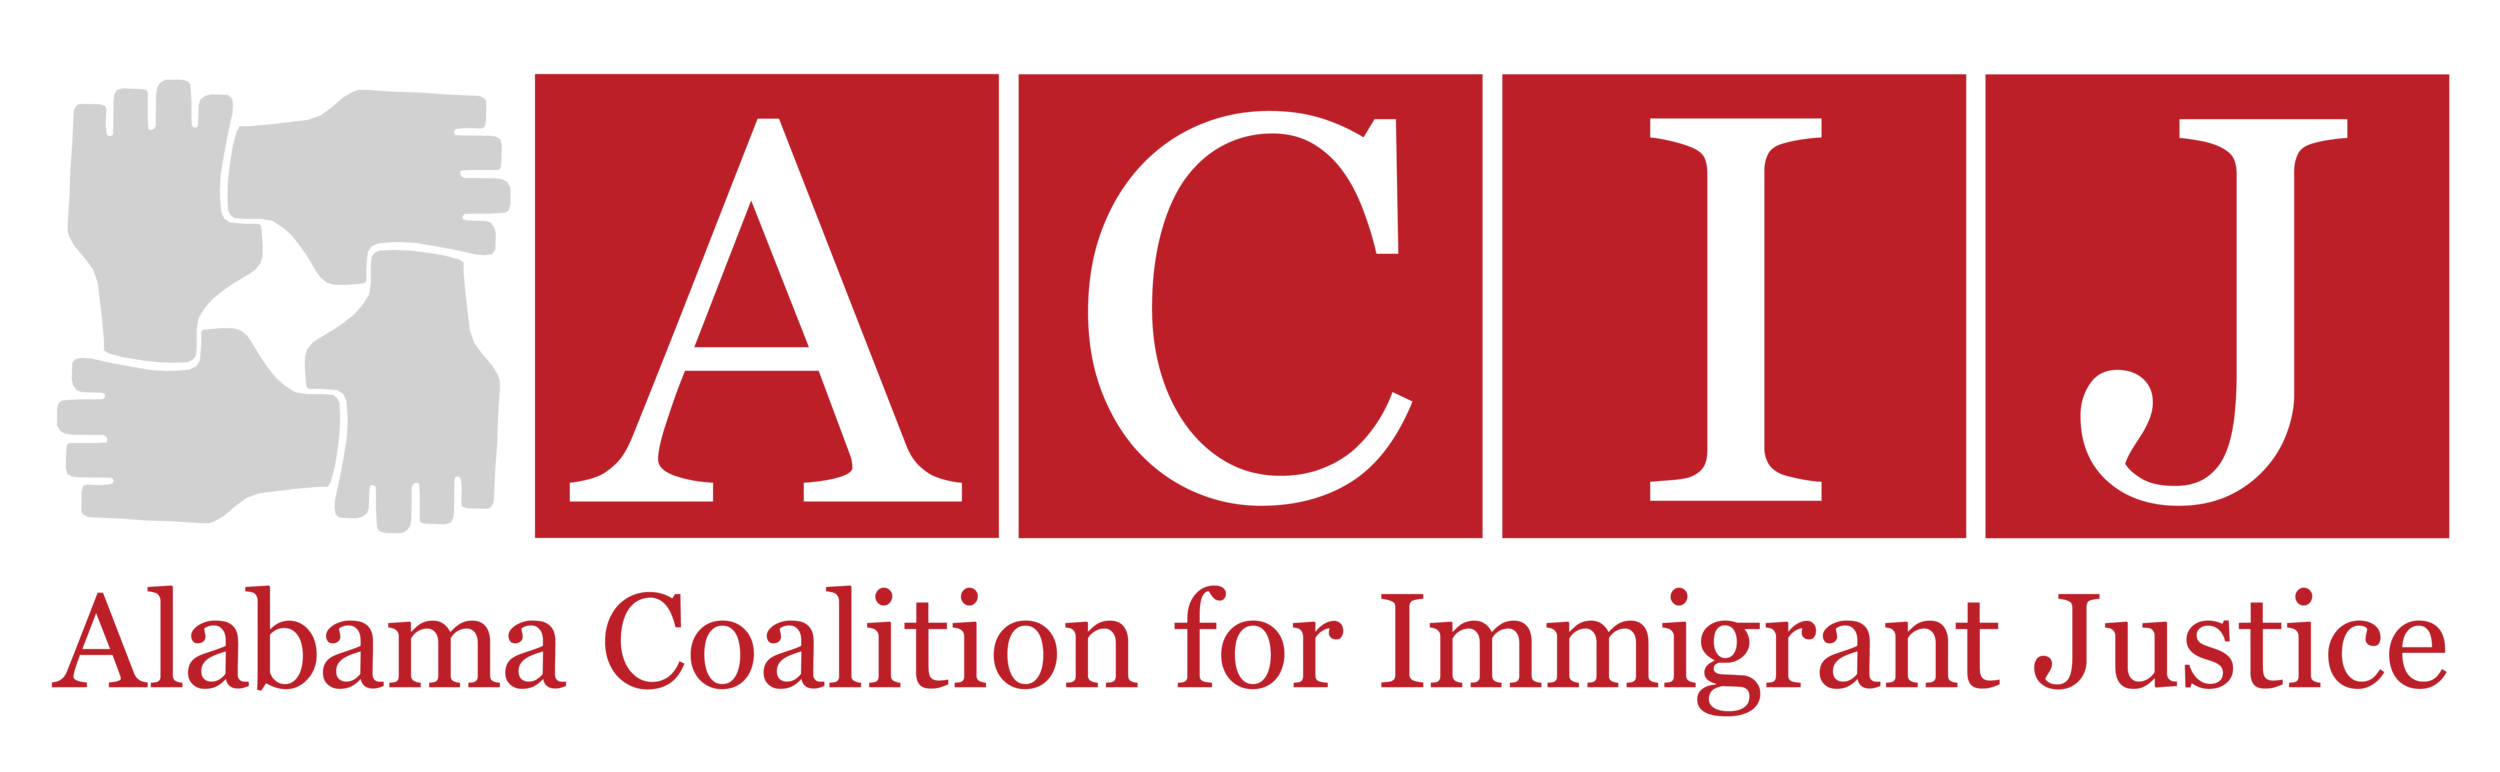 Alabama Coalition for Immigrant Justice.png